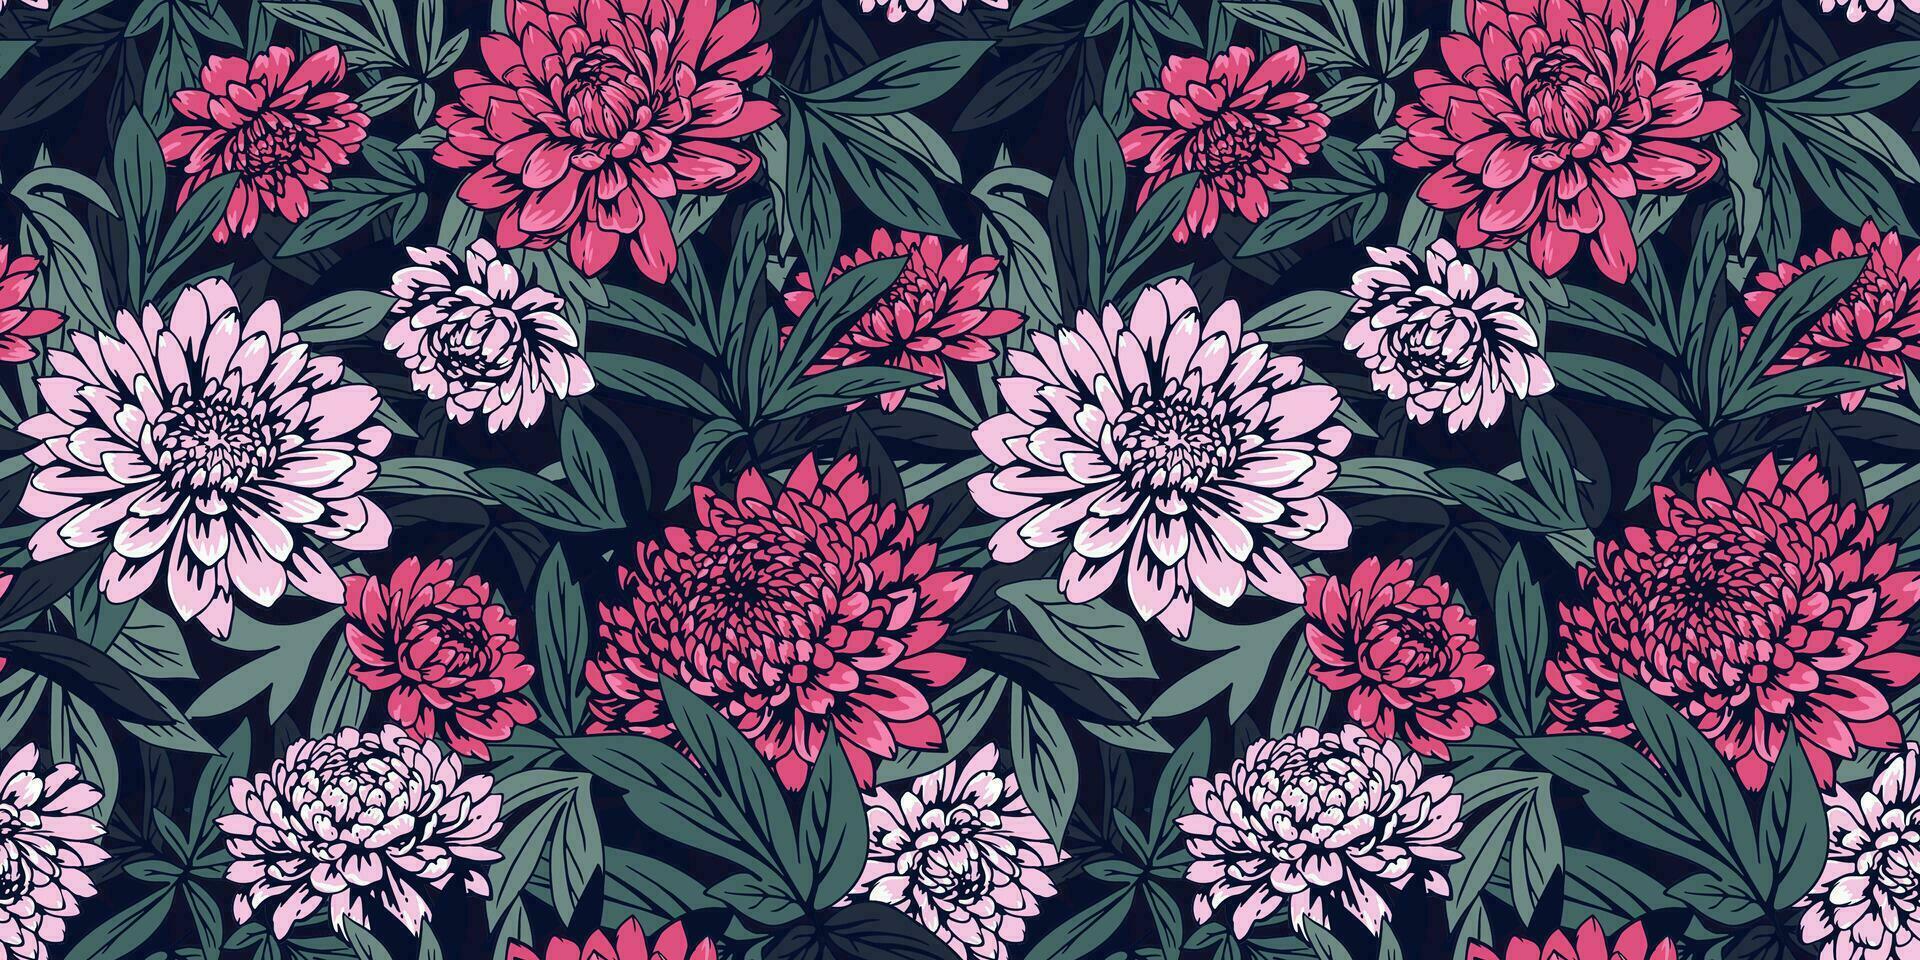 Ornate beautiful blooming flowers and leaves intertwined in seamless pattern. Vector hand drawn abstract artistic dahlias, peonies, large leaves stem print. Template for design, fabric, fashion